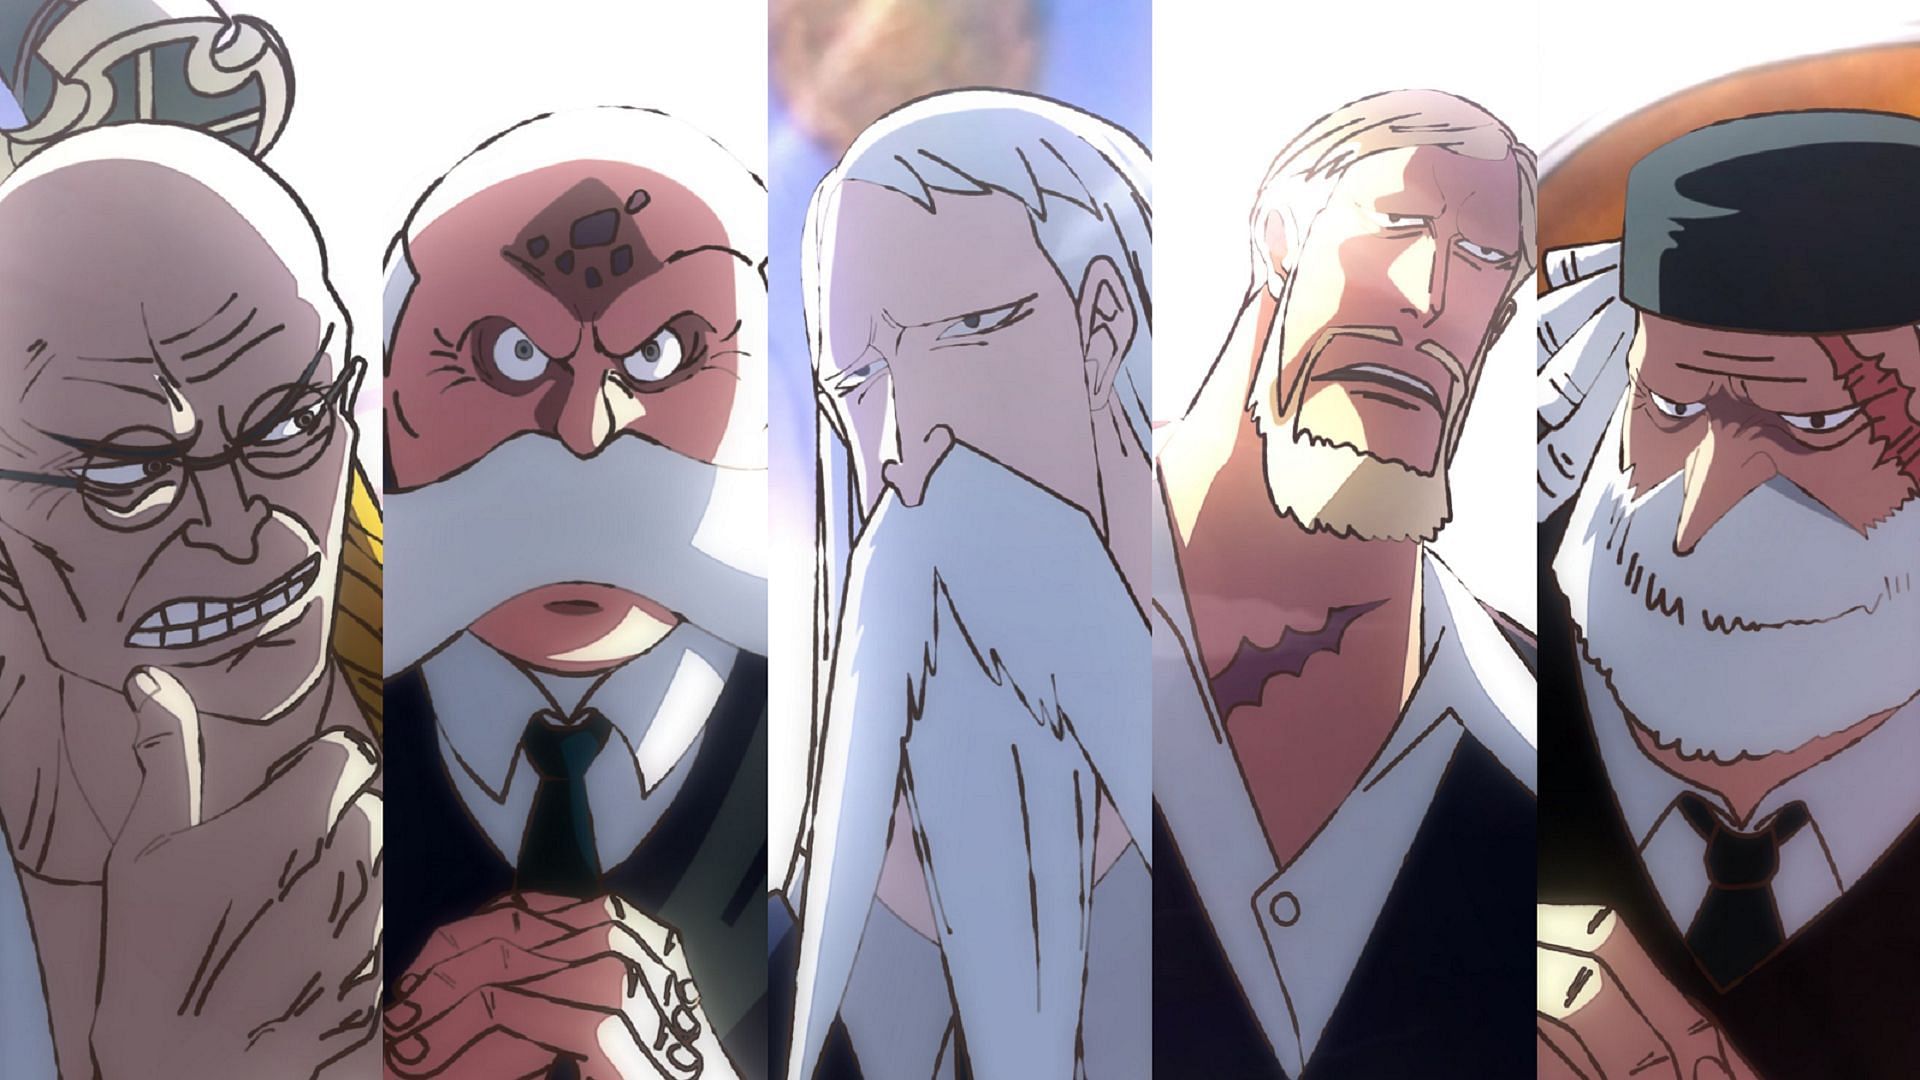 Five Elders Abilities (Theory) : r/OnePiece